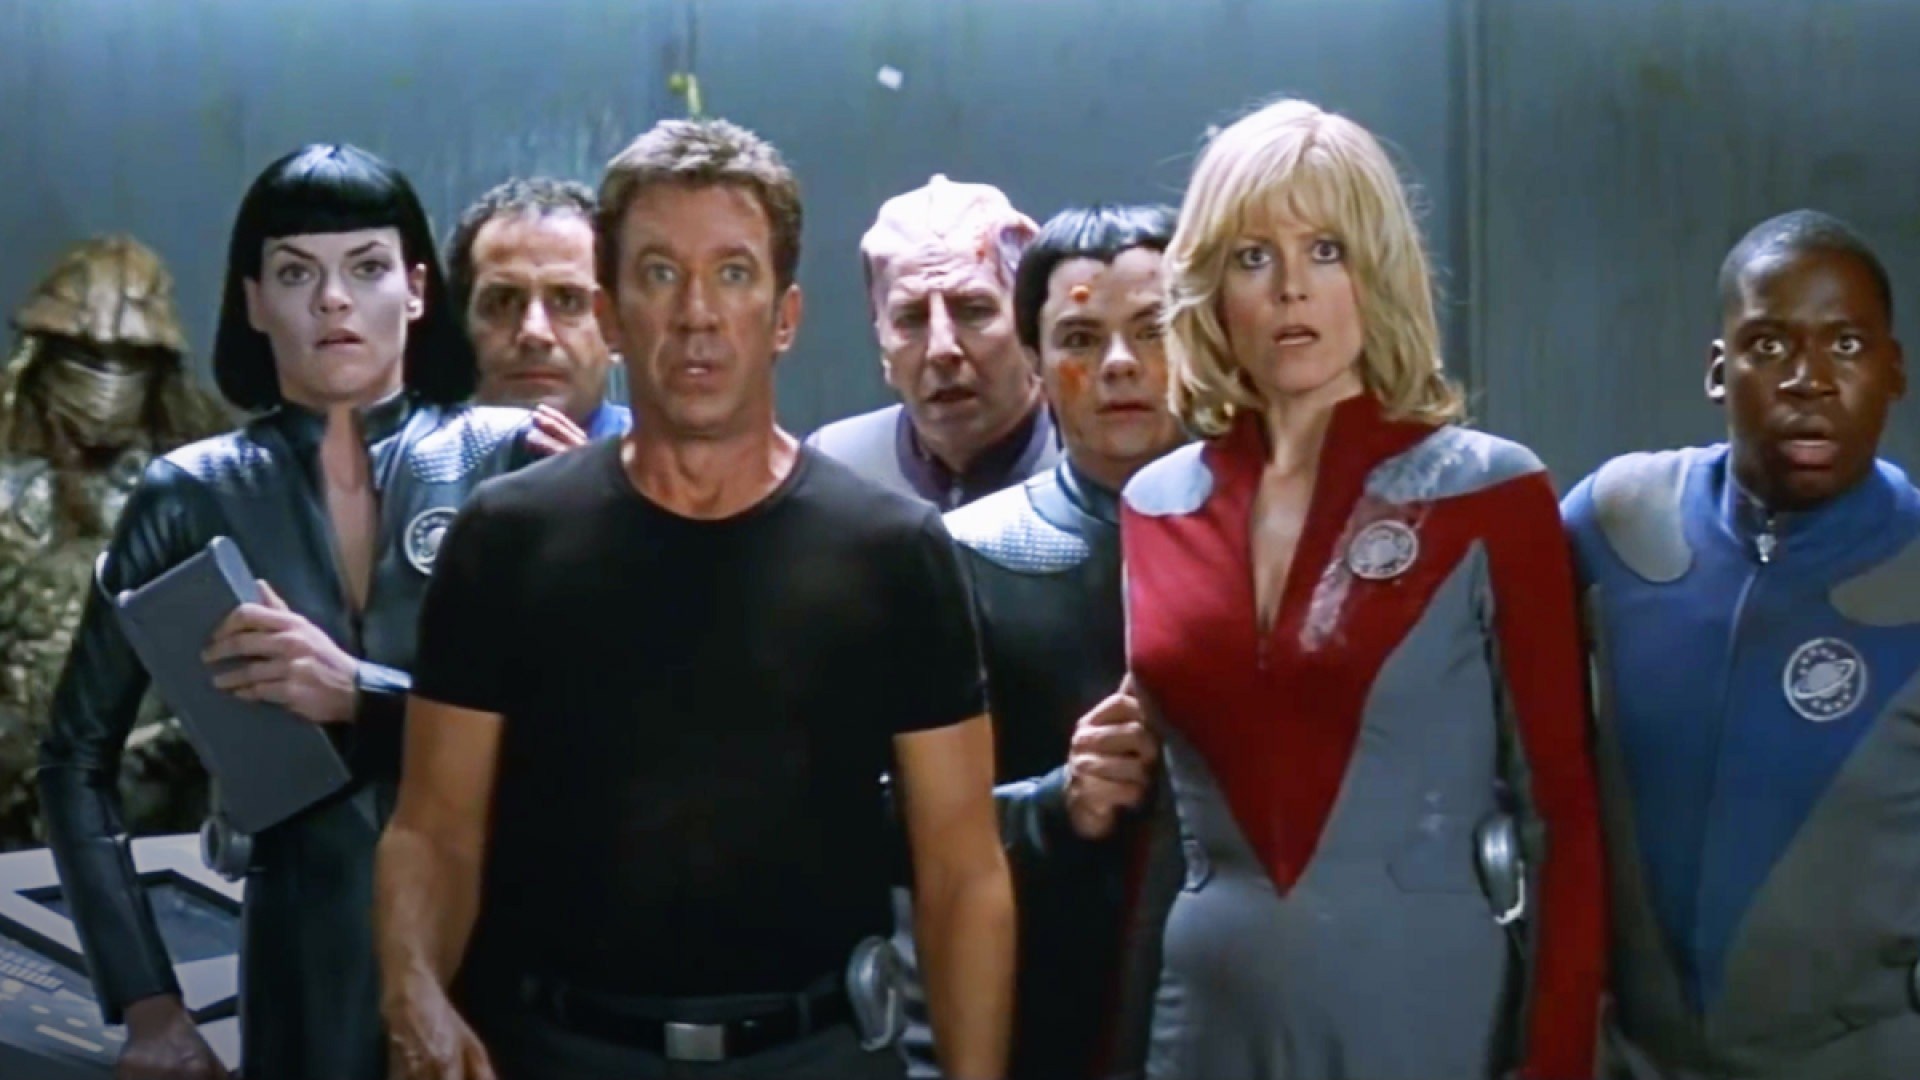 The cast of Galaxy Quest standing in an elevator